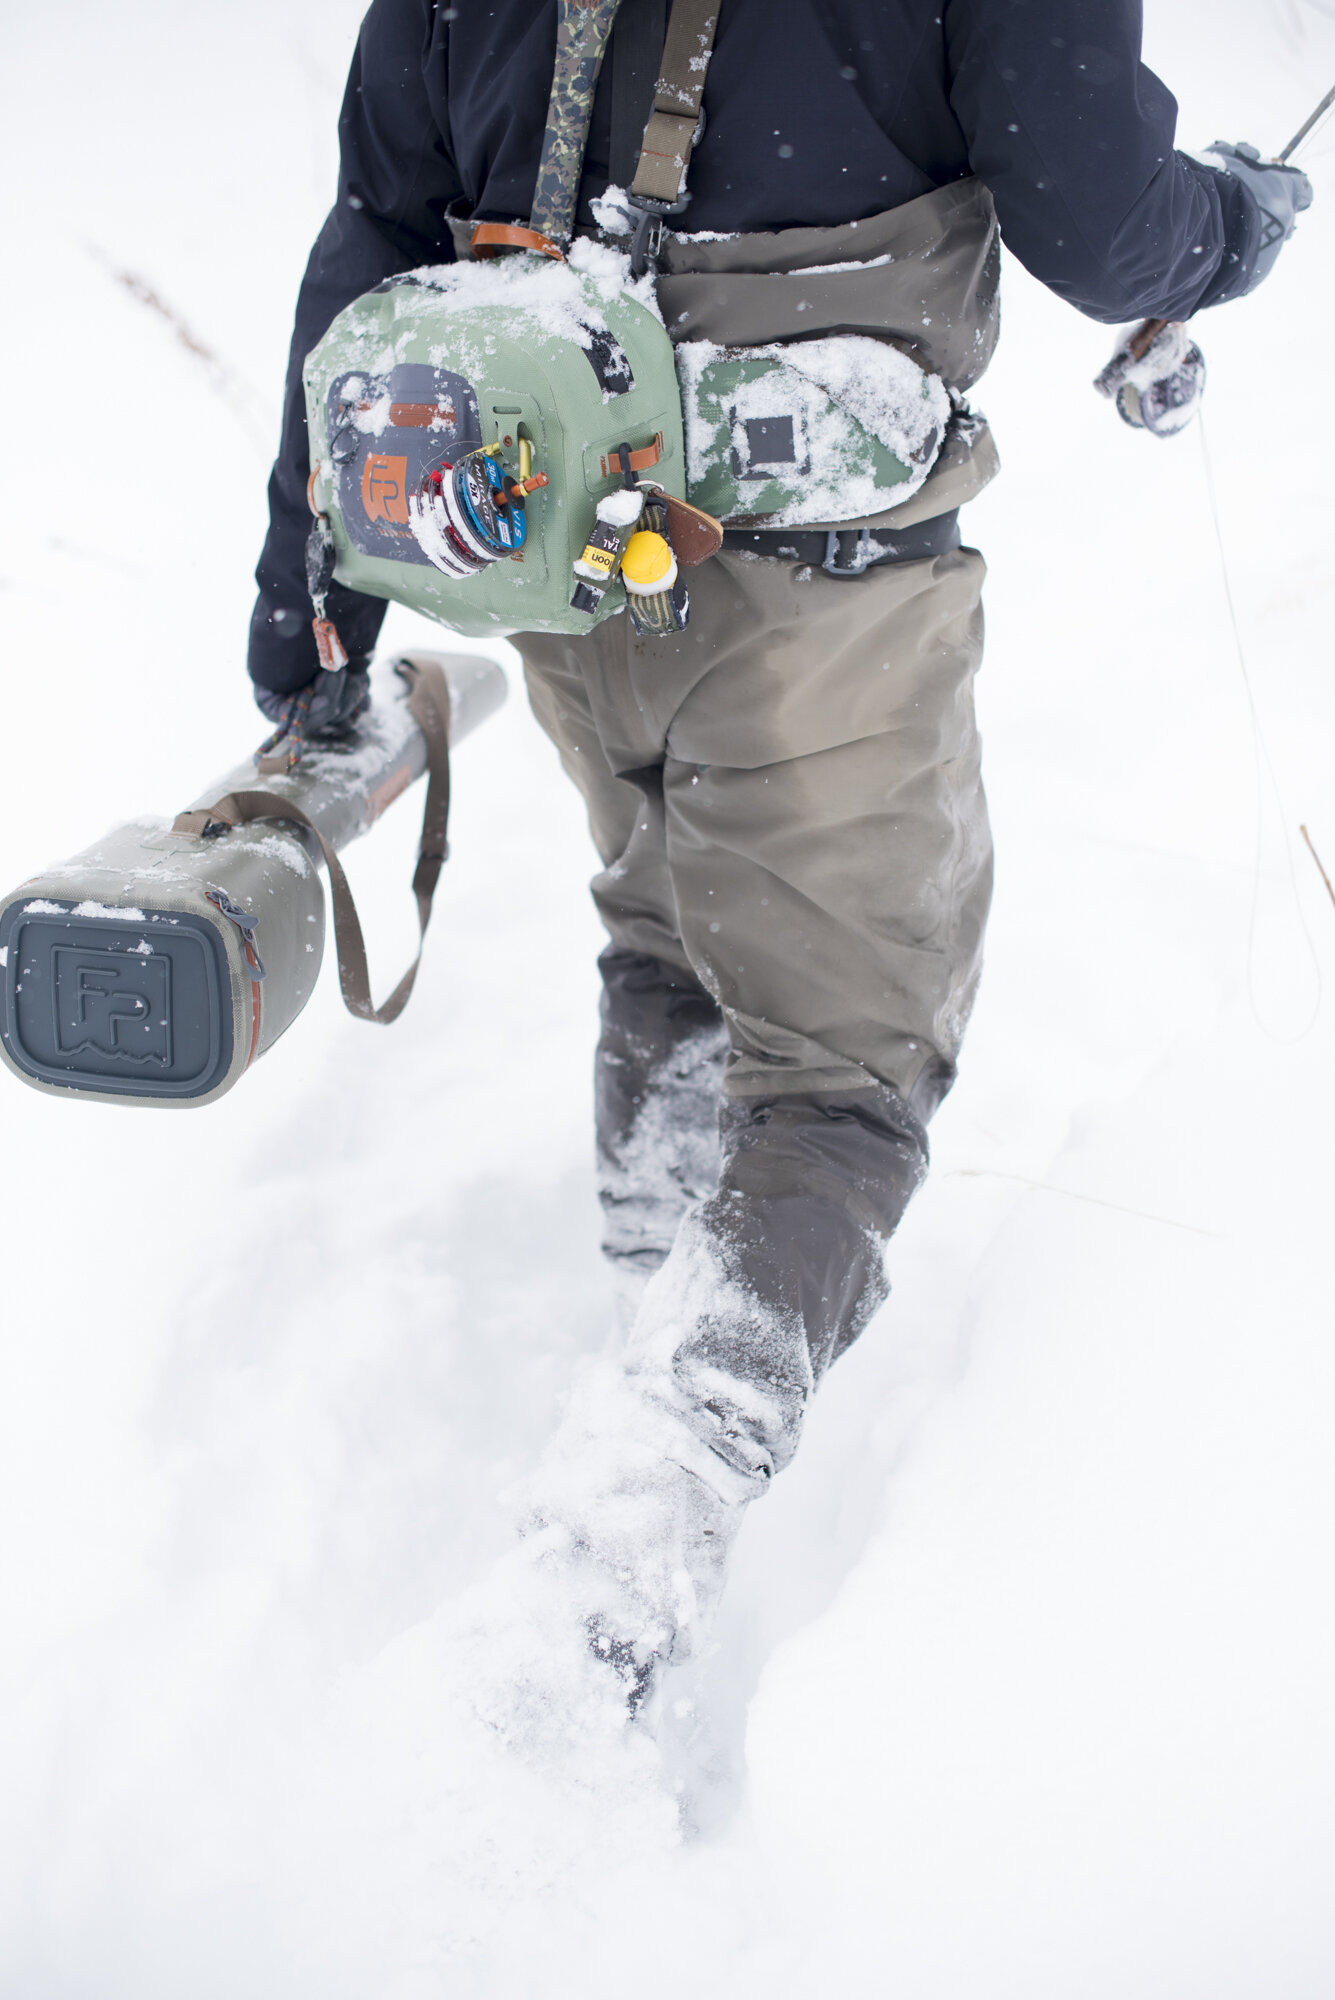  A fly fisherman walking through deep snow with all his gear in Colorado.  